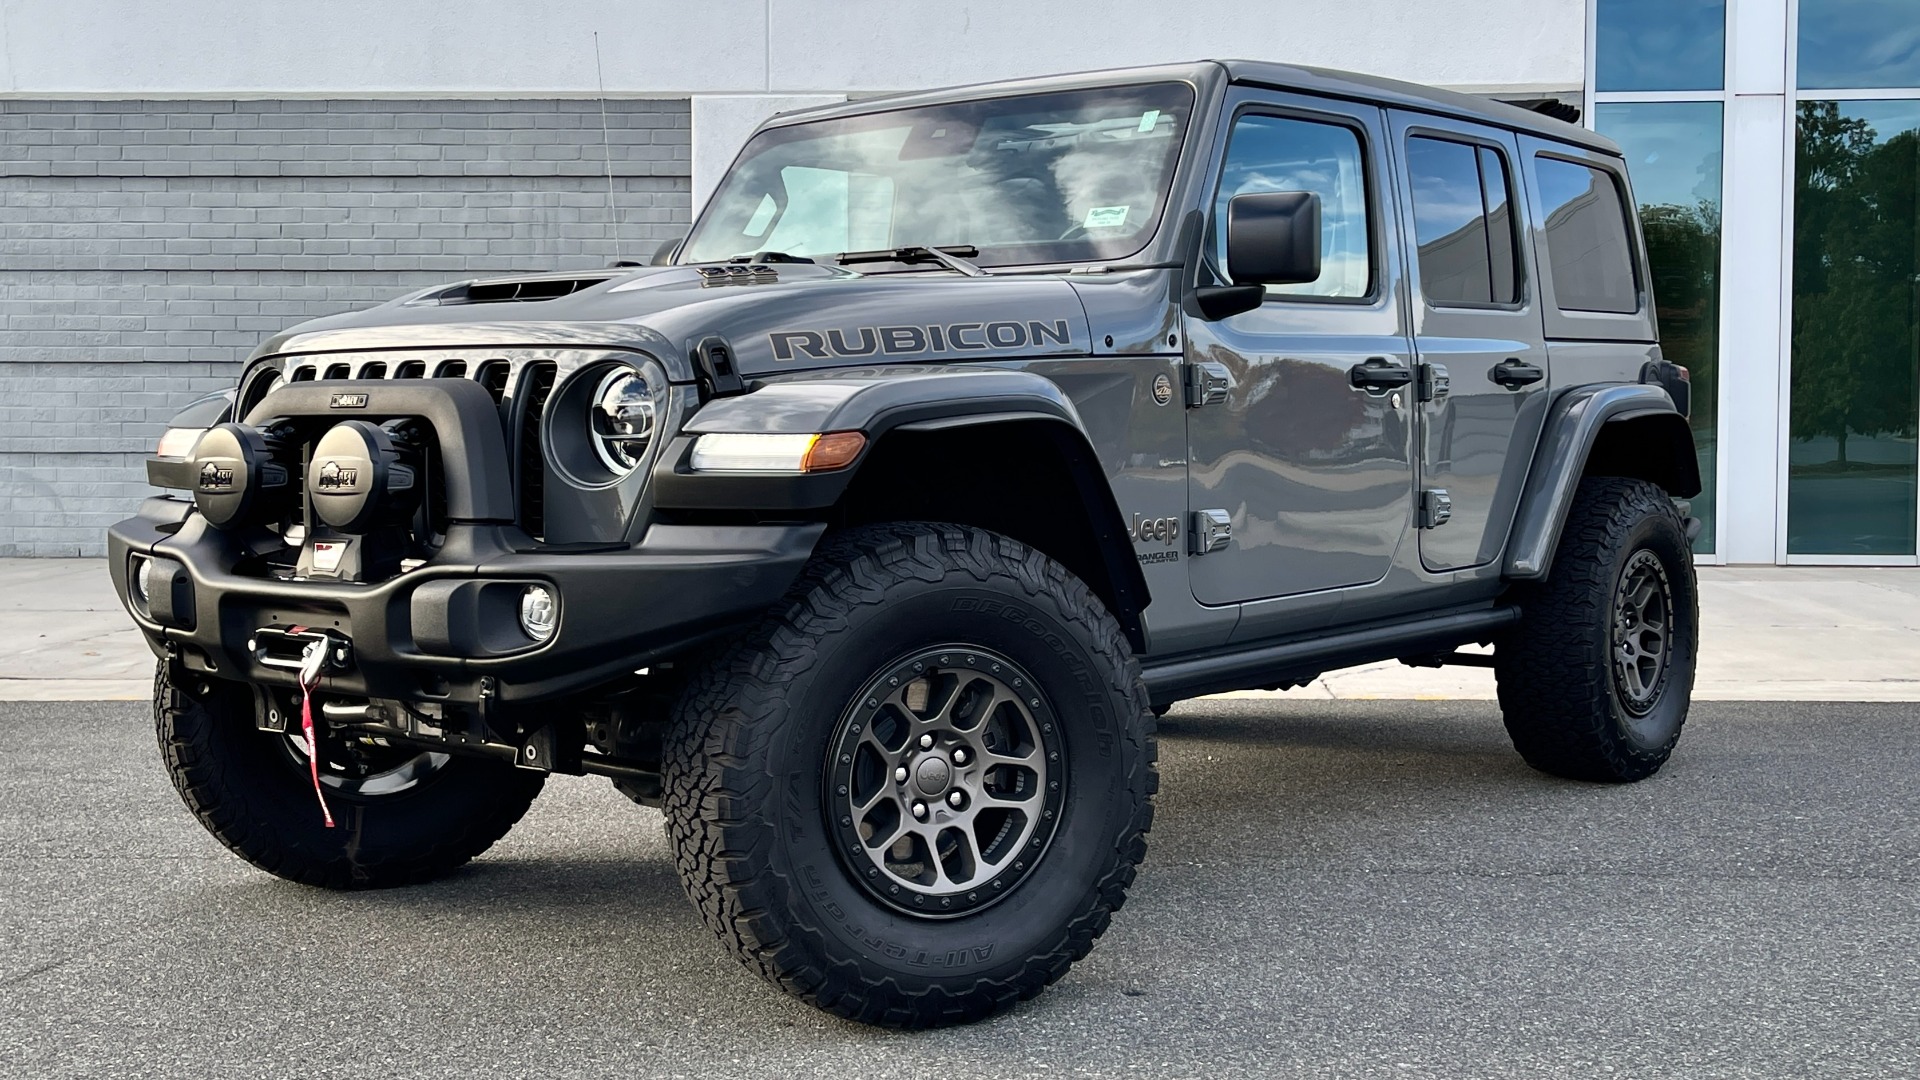 Used 2022 Jeep Wrangler UNLIMITED RUBICON 392 $10K AEV UPGRADES / XTREME  RECON / SKY ONE TOUCH For Sale ($90,999) | Formula Imports Stock #FC12012